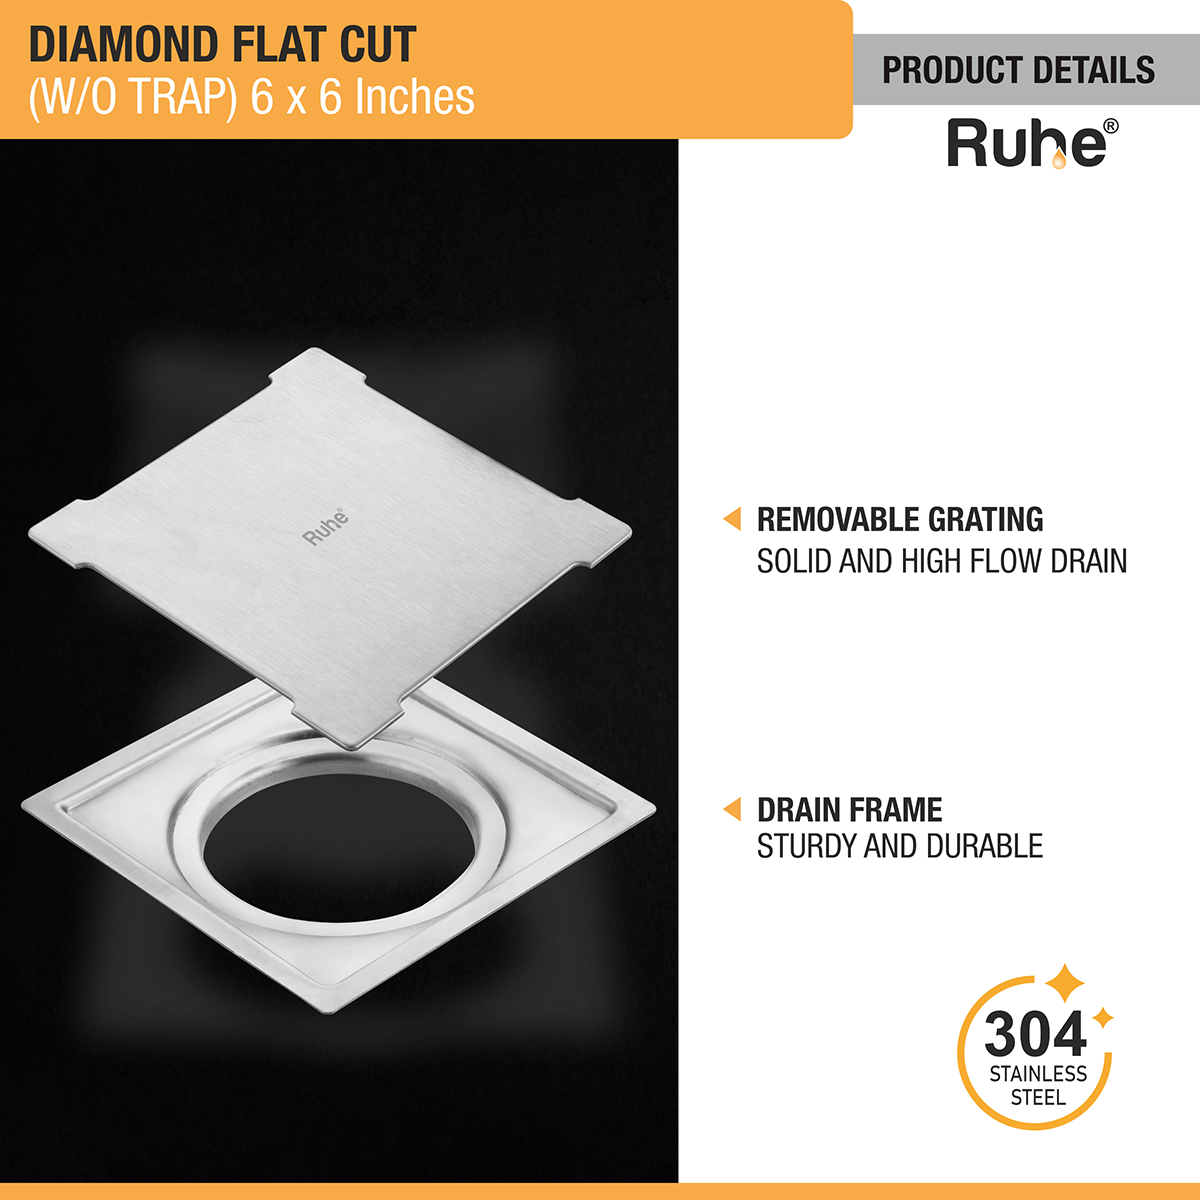 Diamond Square Flat Cut 304-Grade Floor Drain (6 x 6 Inches) with removable grating and drain frame